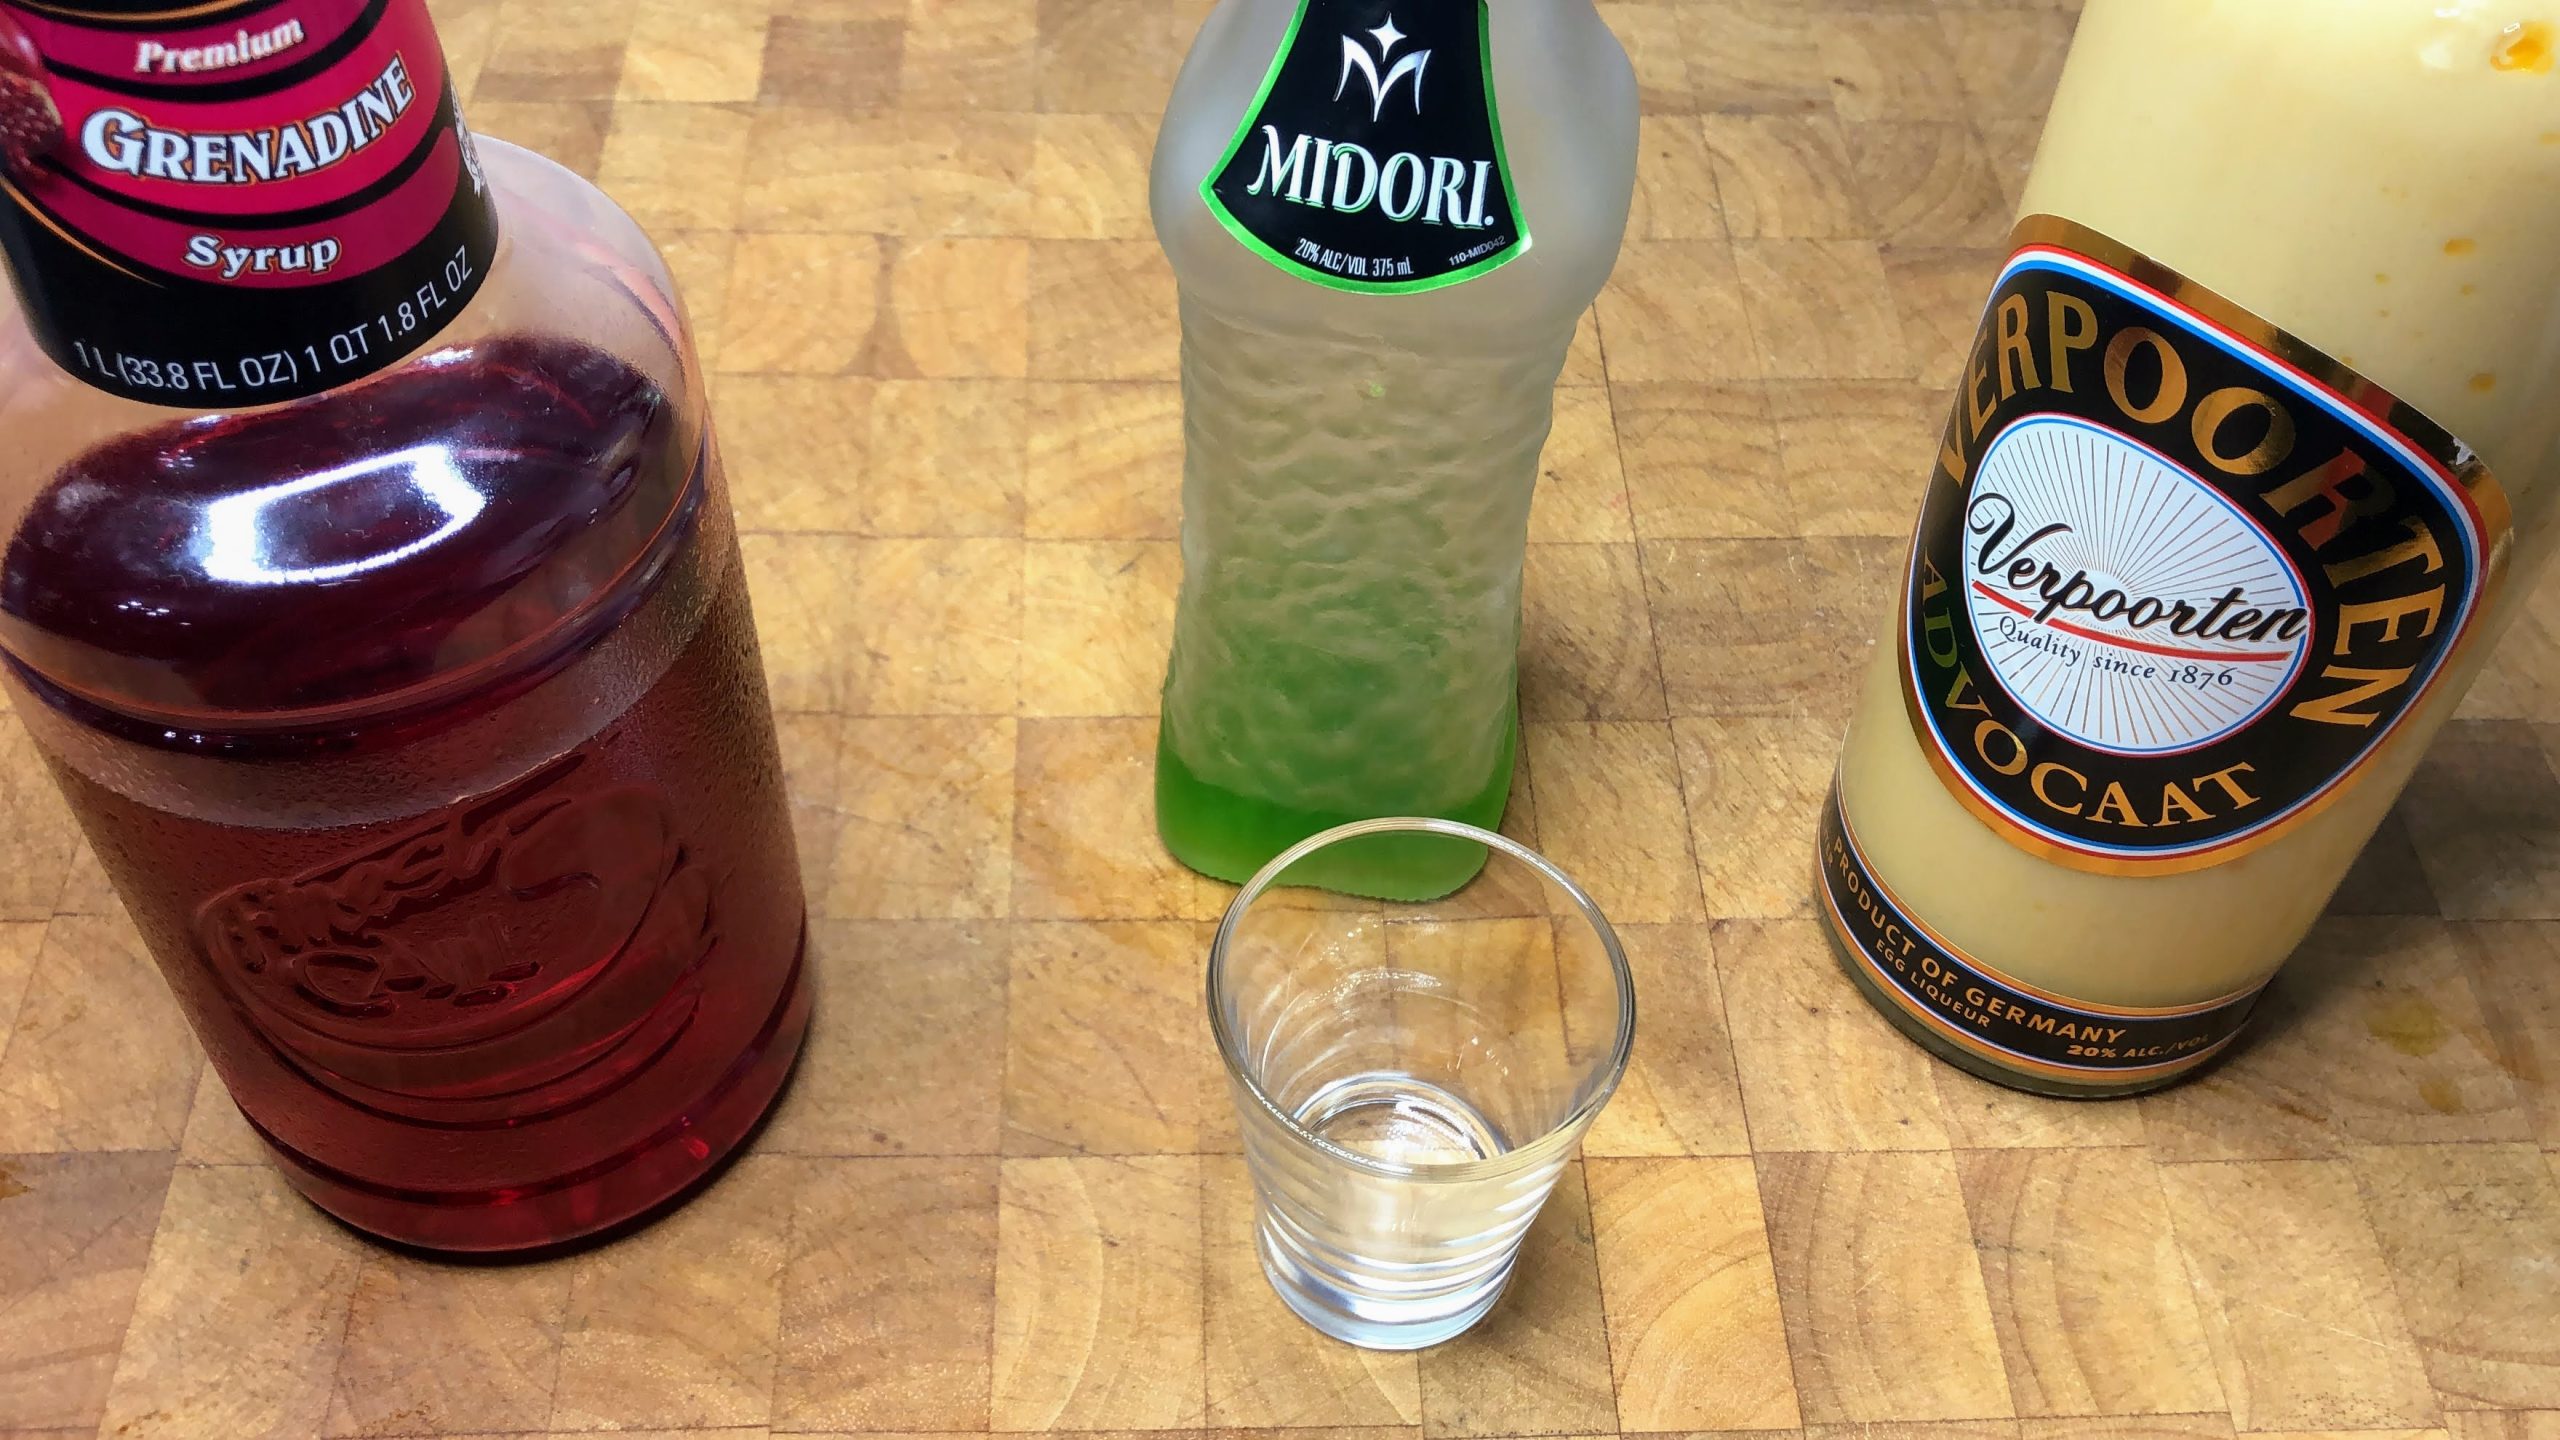 shot glass on wooden table next to bottles of advocaat, midori and grenadine